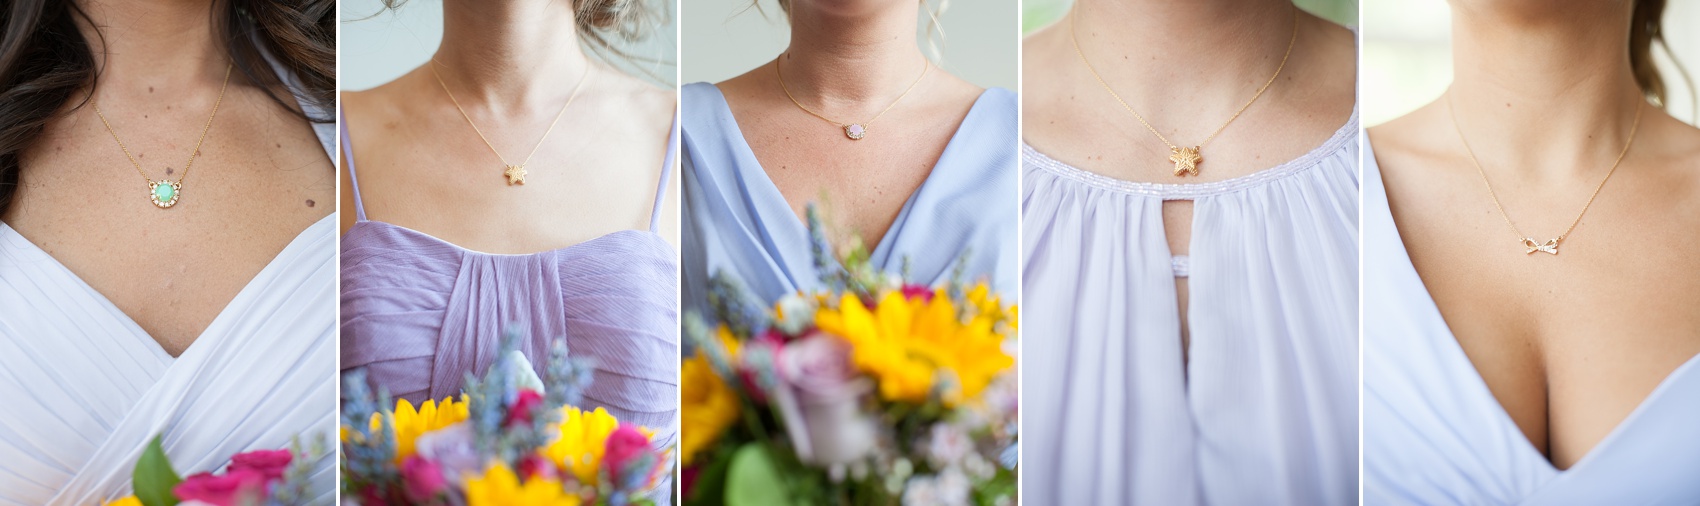 Kate Spade necklaces hand selected for each bridesmaid, in lavender purple dresses. Photo by Mikkel Paige Photography.